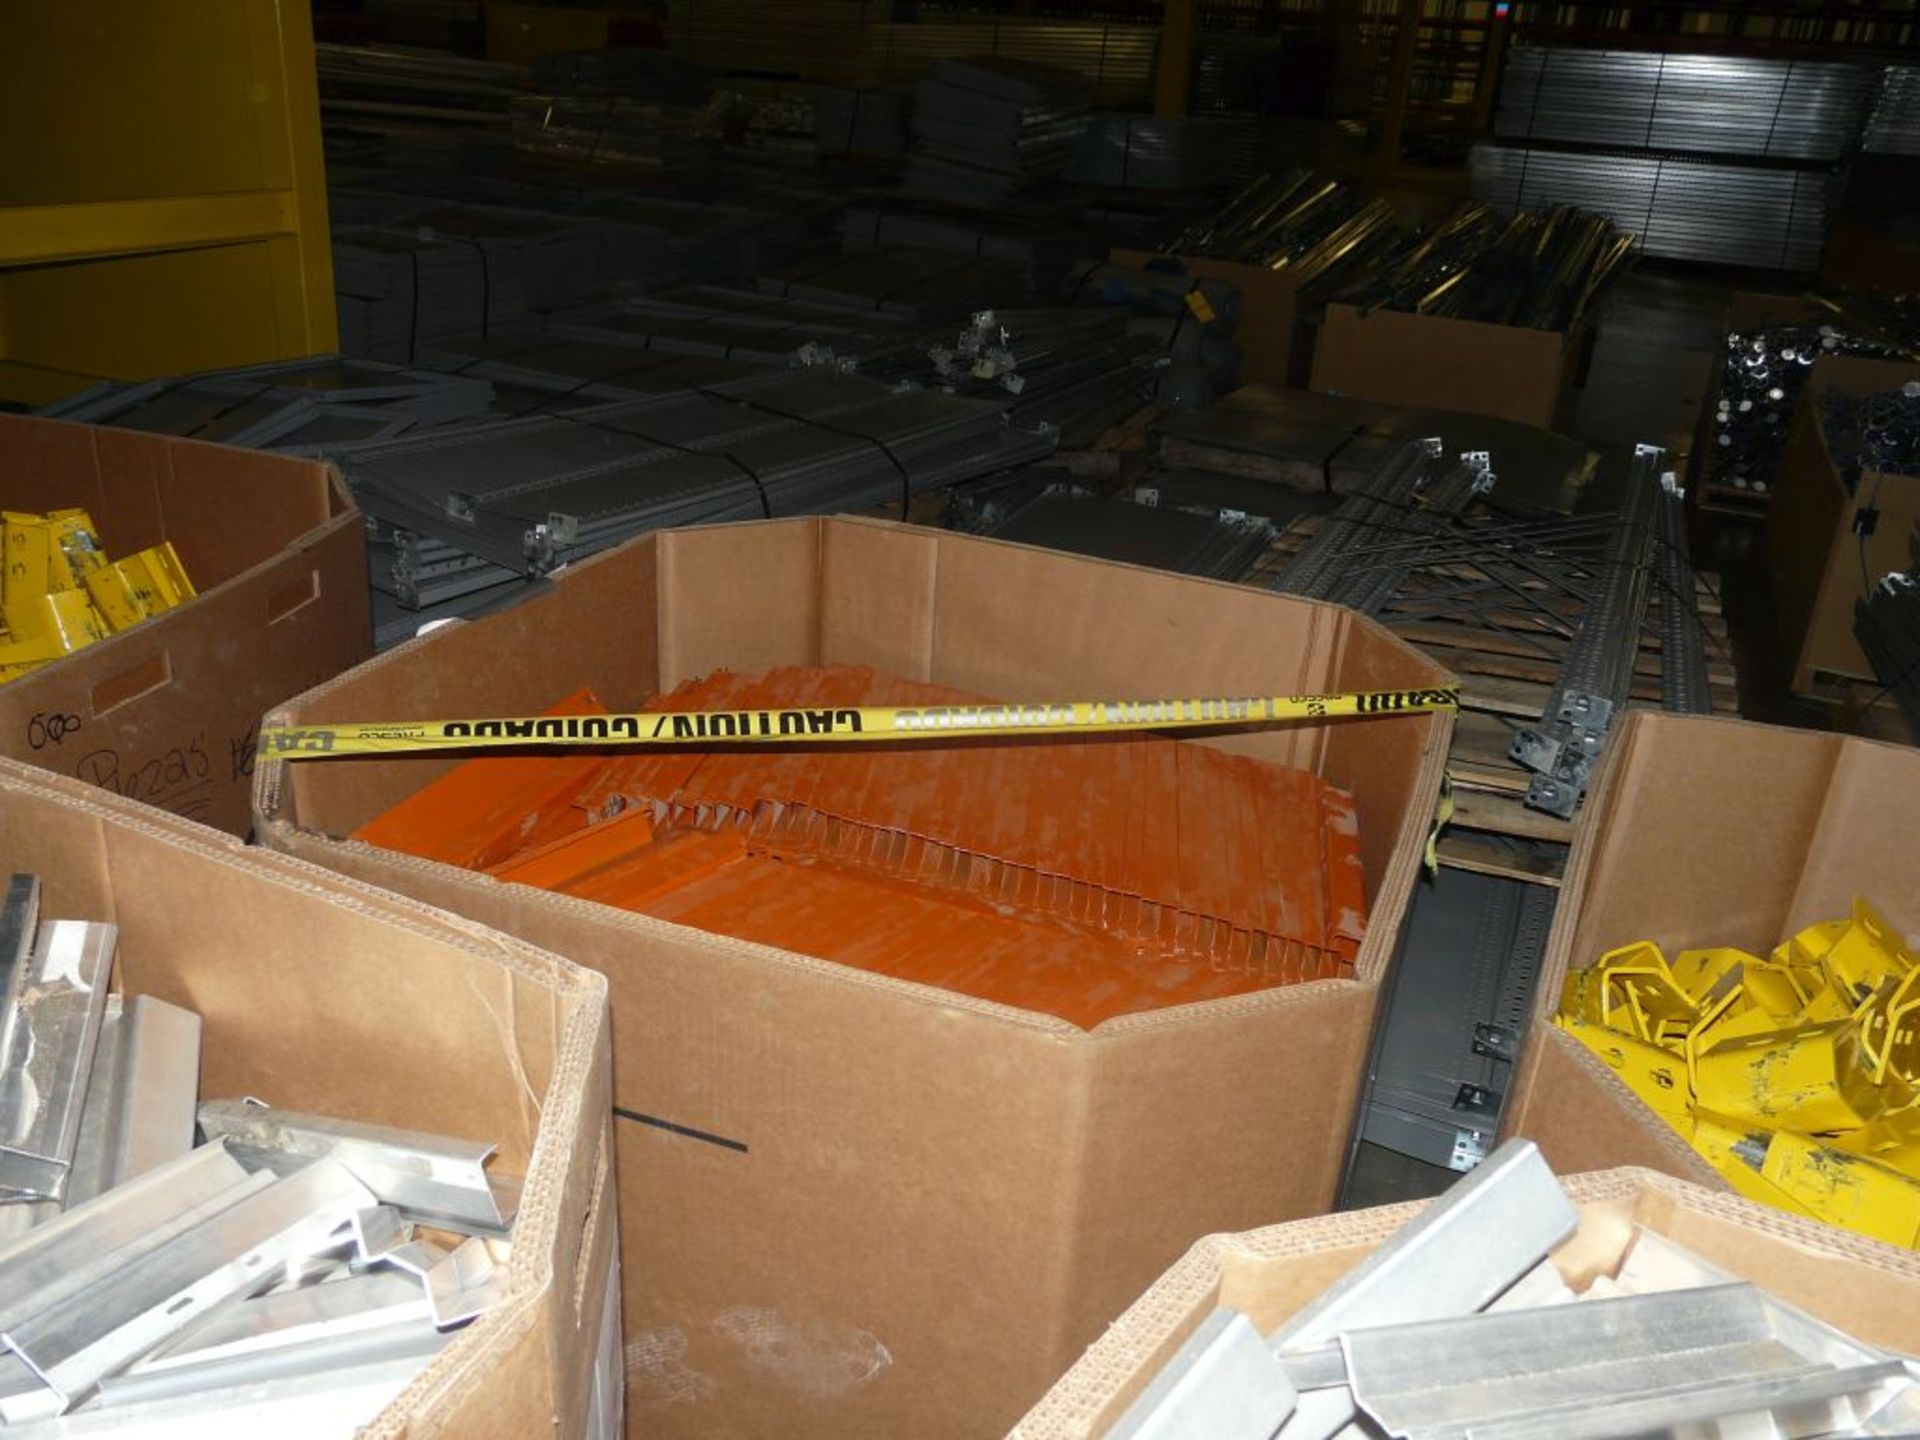 Lot of Pallet Racking Braces - 21"L x 3-1/2"W; Tag: 222373 - $30 Lot Loading Fee - Image 3 of 3